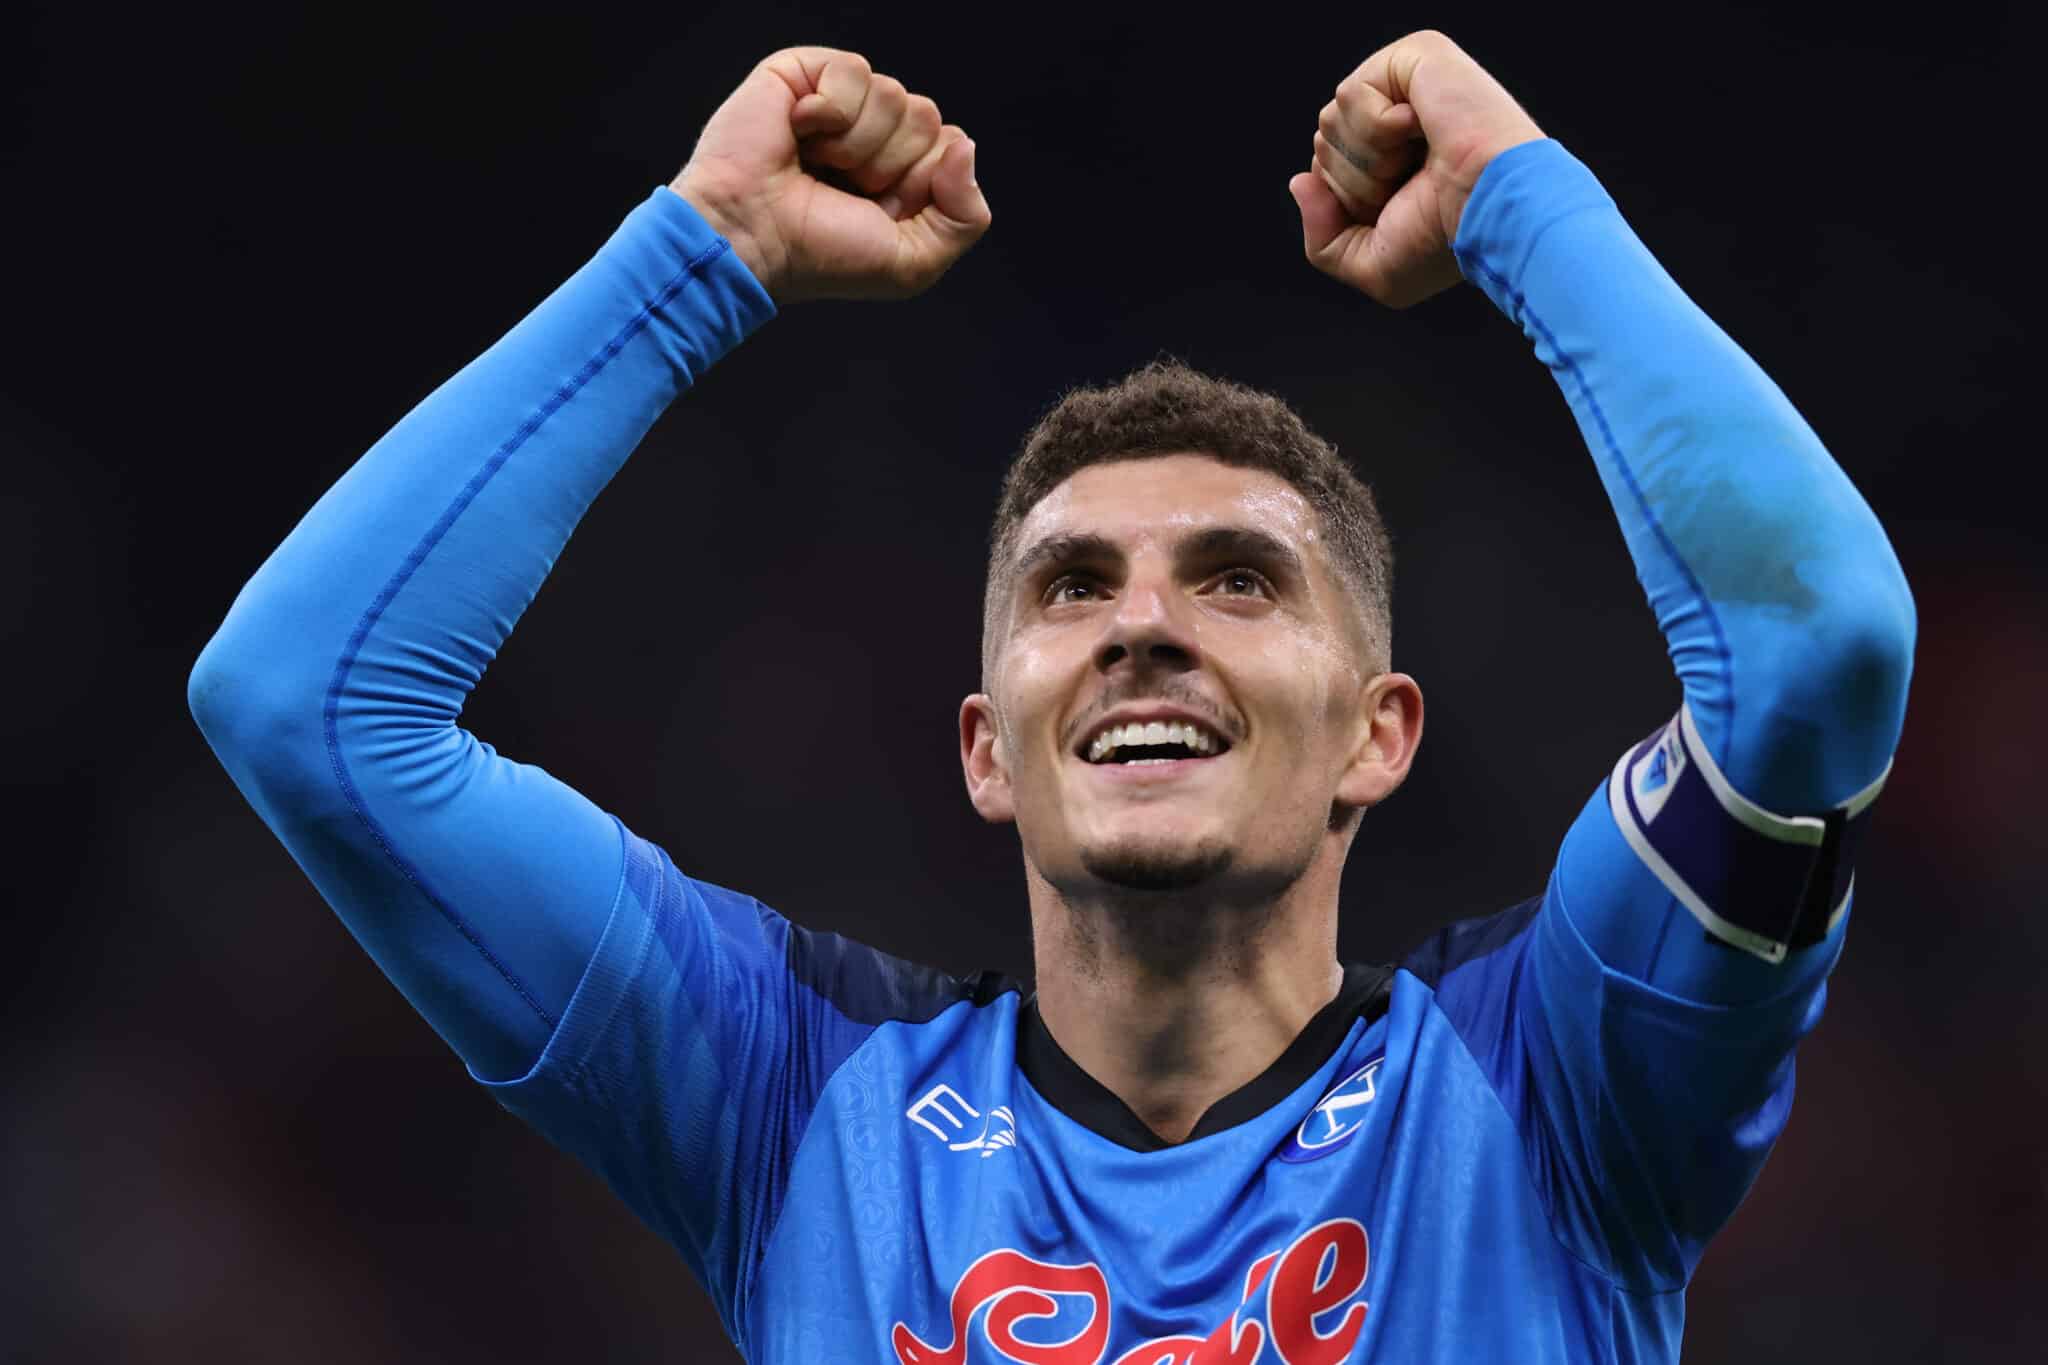 Giovanni Di Lorenzo has surprisingly displayed some signs of restlessness as of late, but Napoli have no plans to sell him and surely won’t gift him.